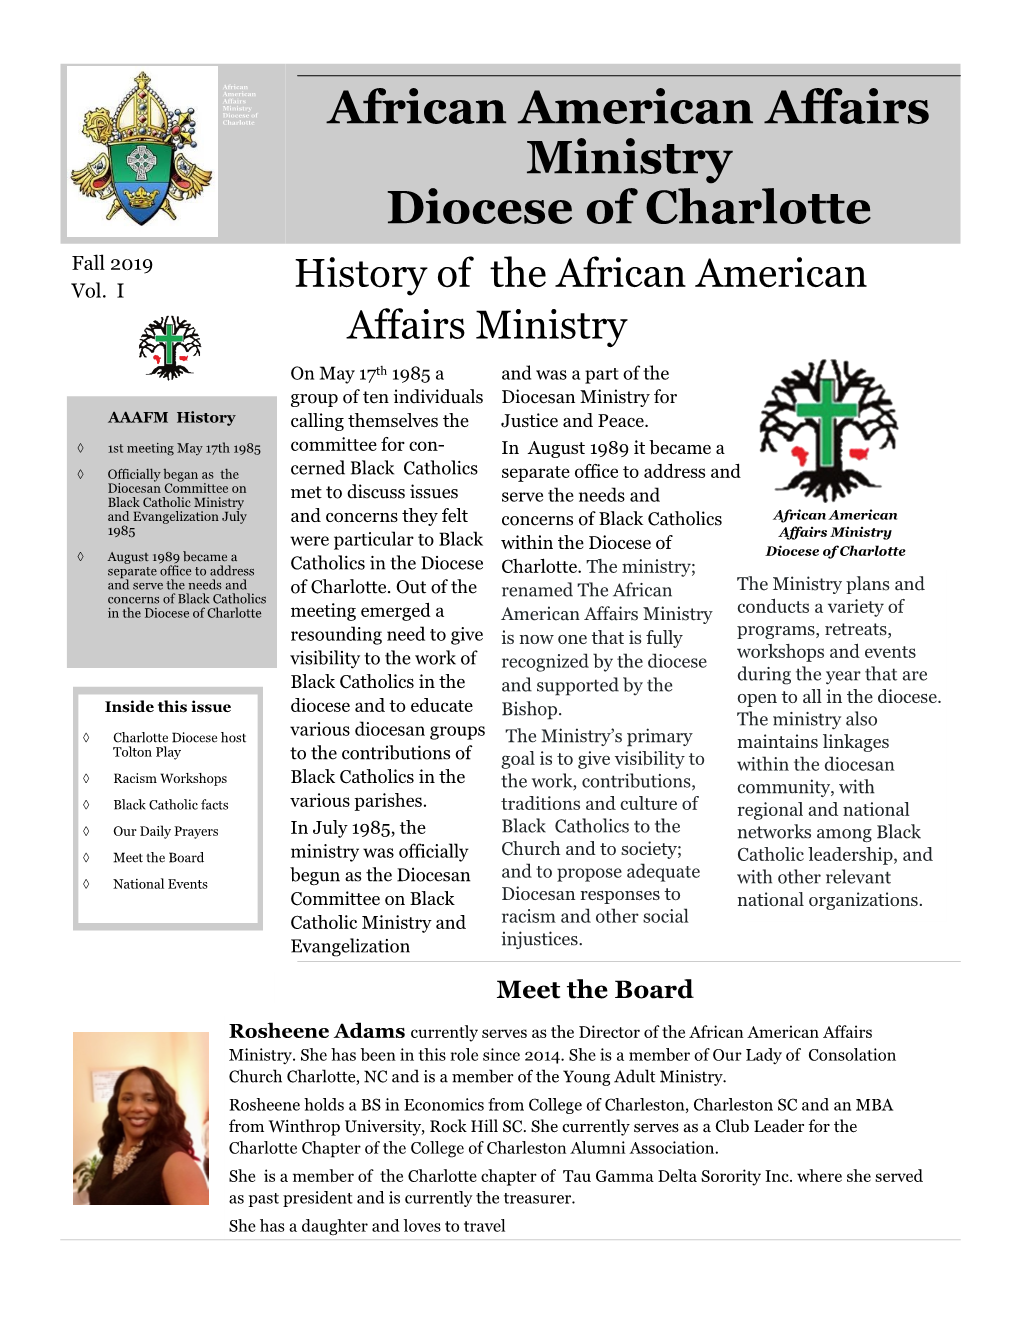 African American Affairs Ministry Diocese of Charlotte African American Affairs Ministry Diocese of Charlotte